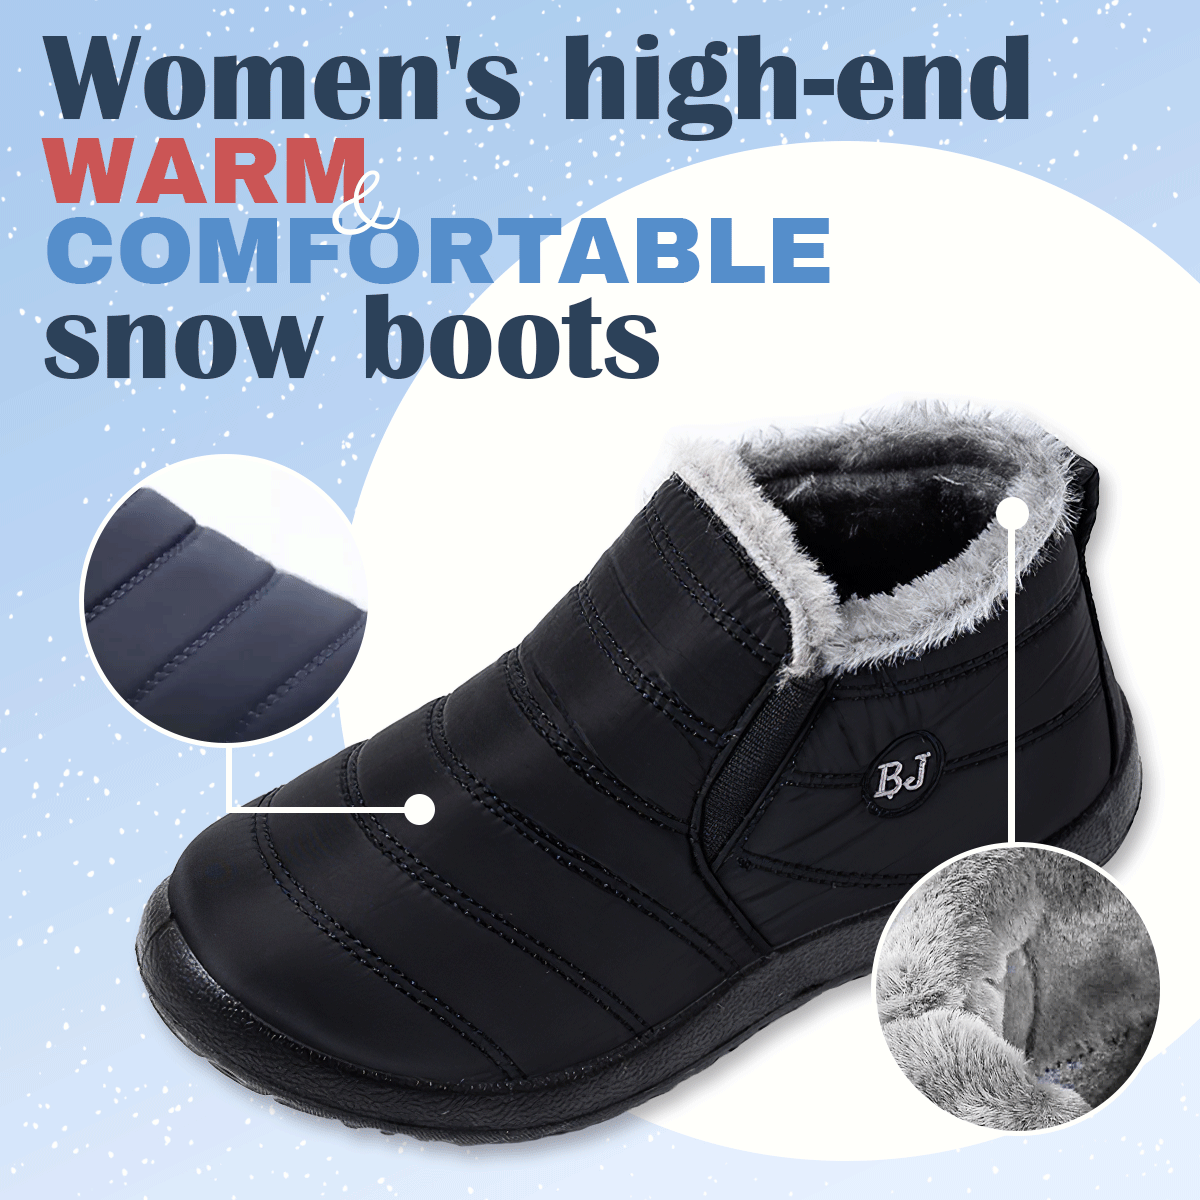 Women's high-end warm & comfortable snow boots